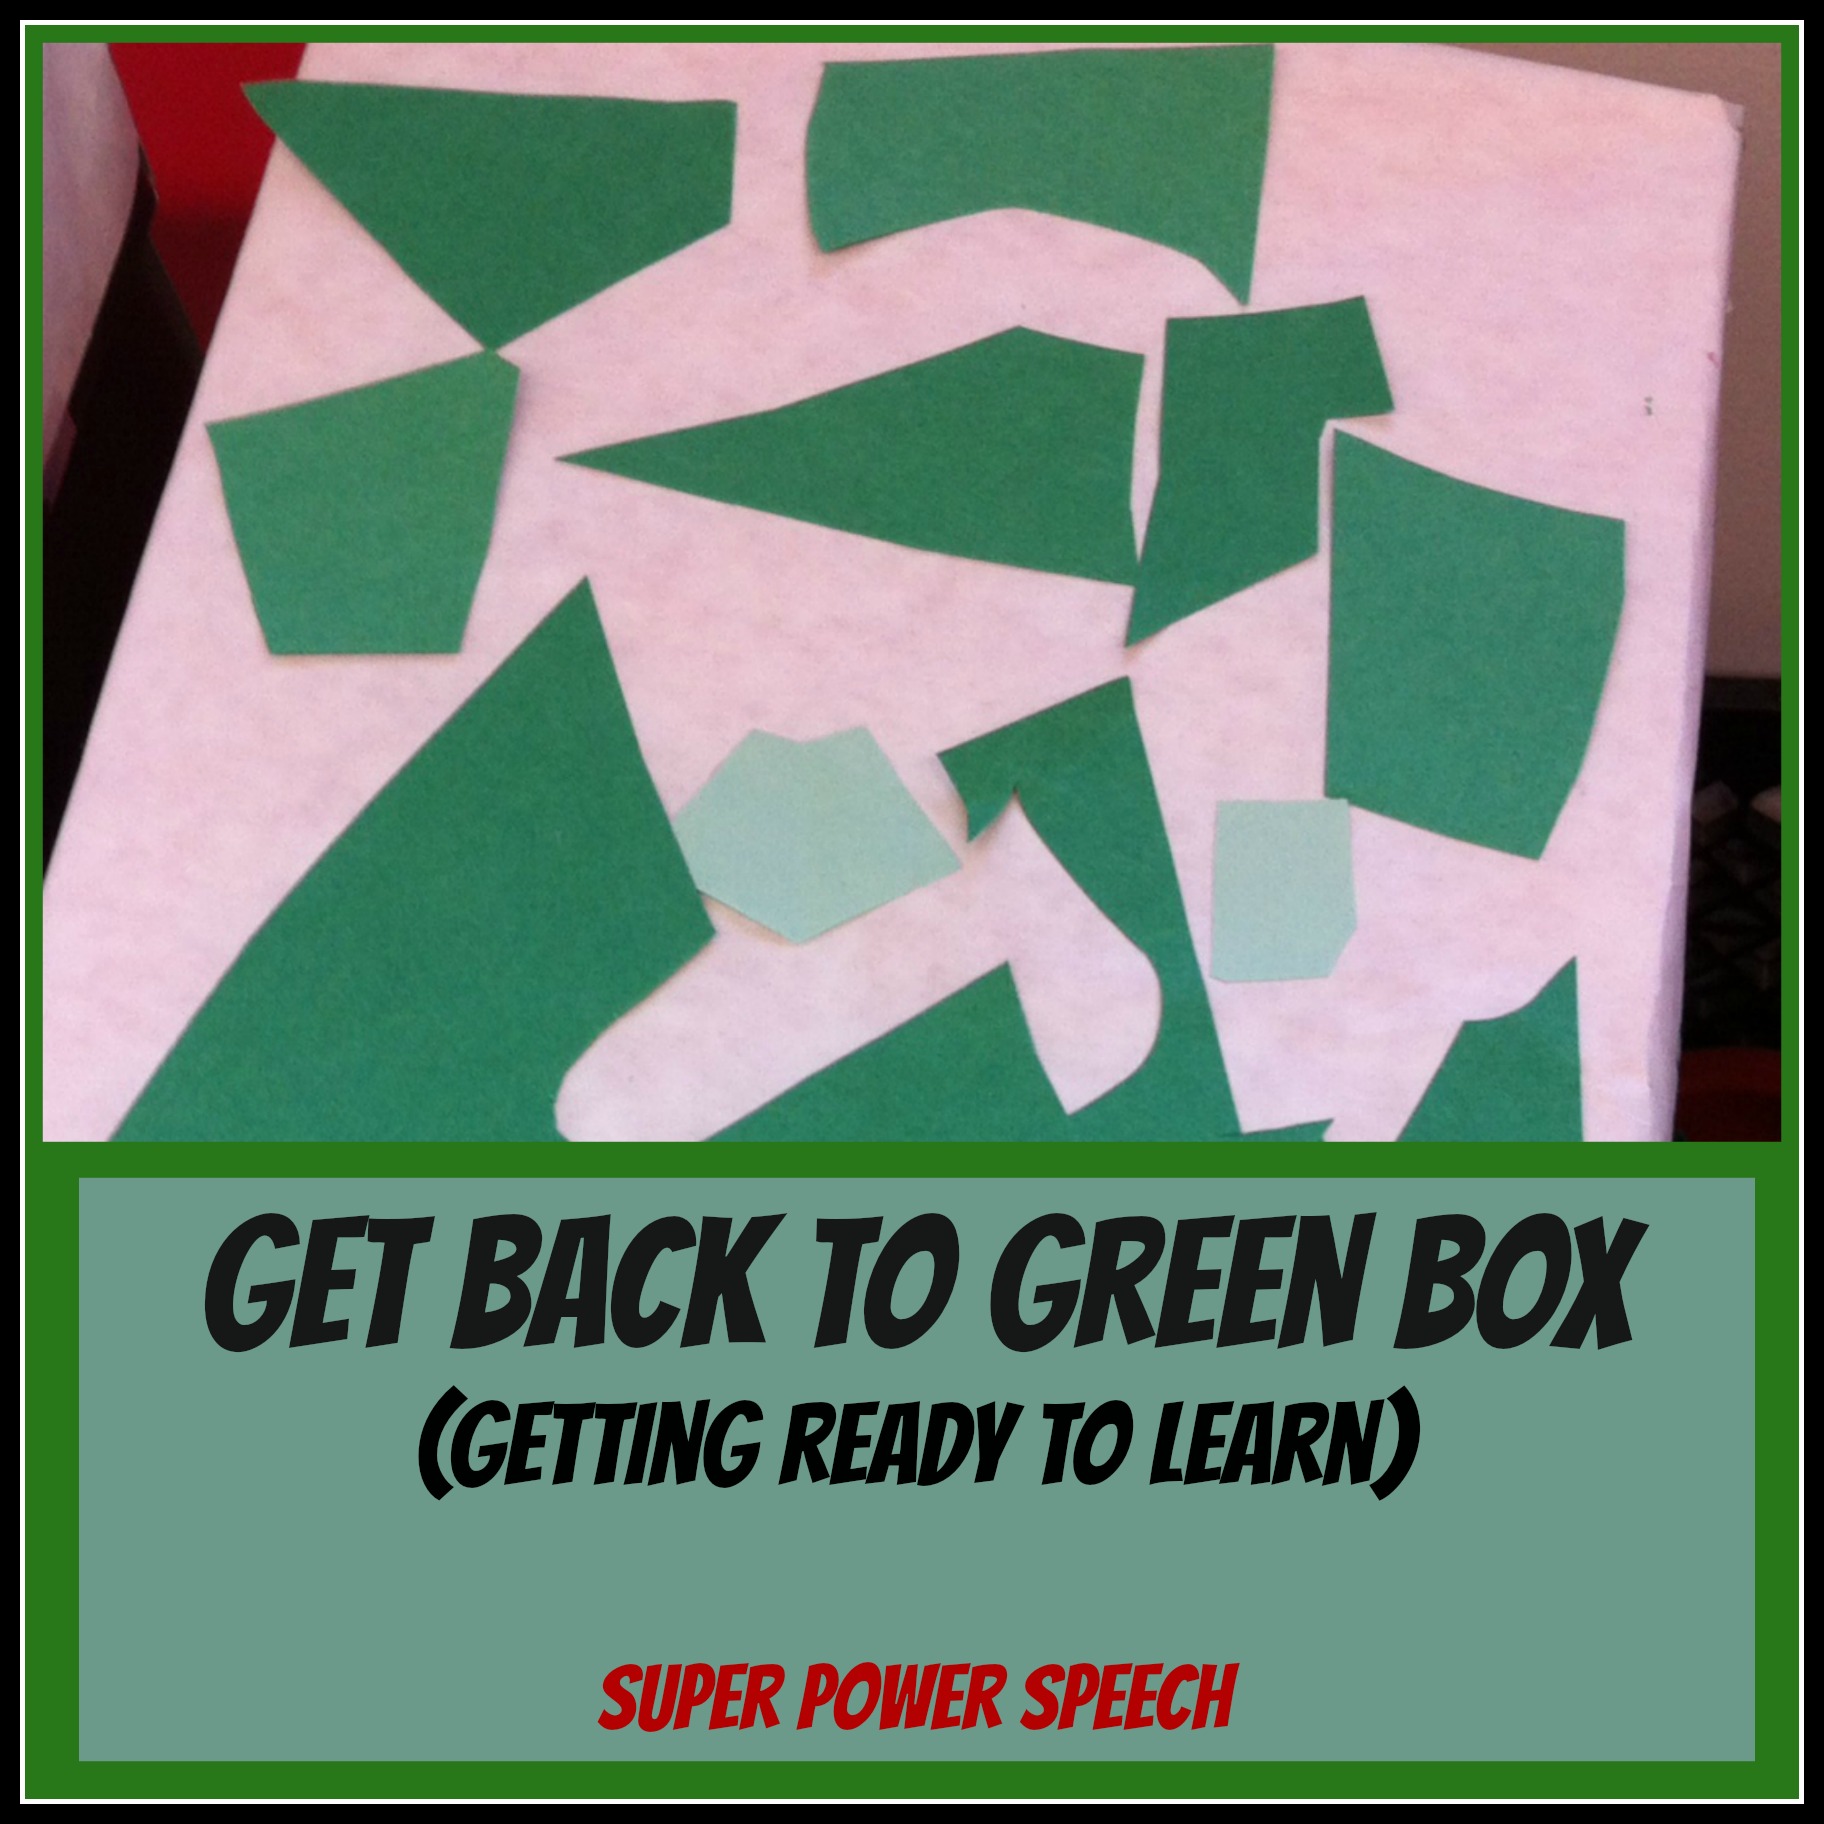 Get Back to Green Box (Getting Ready to Learn)